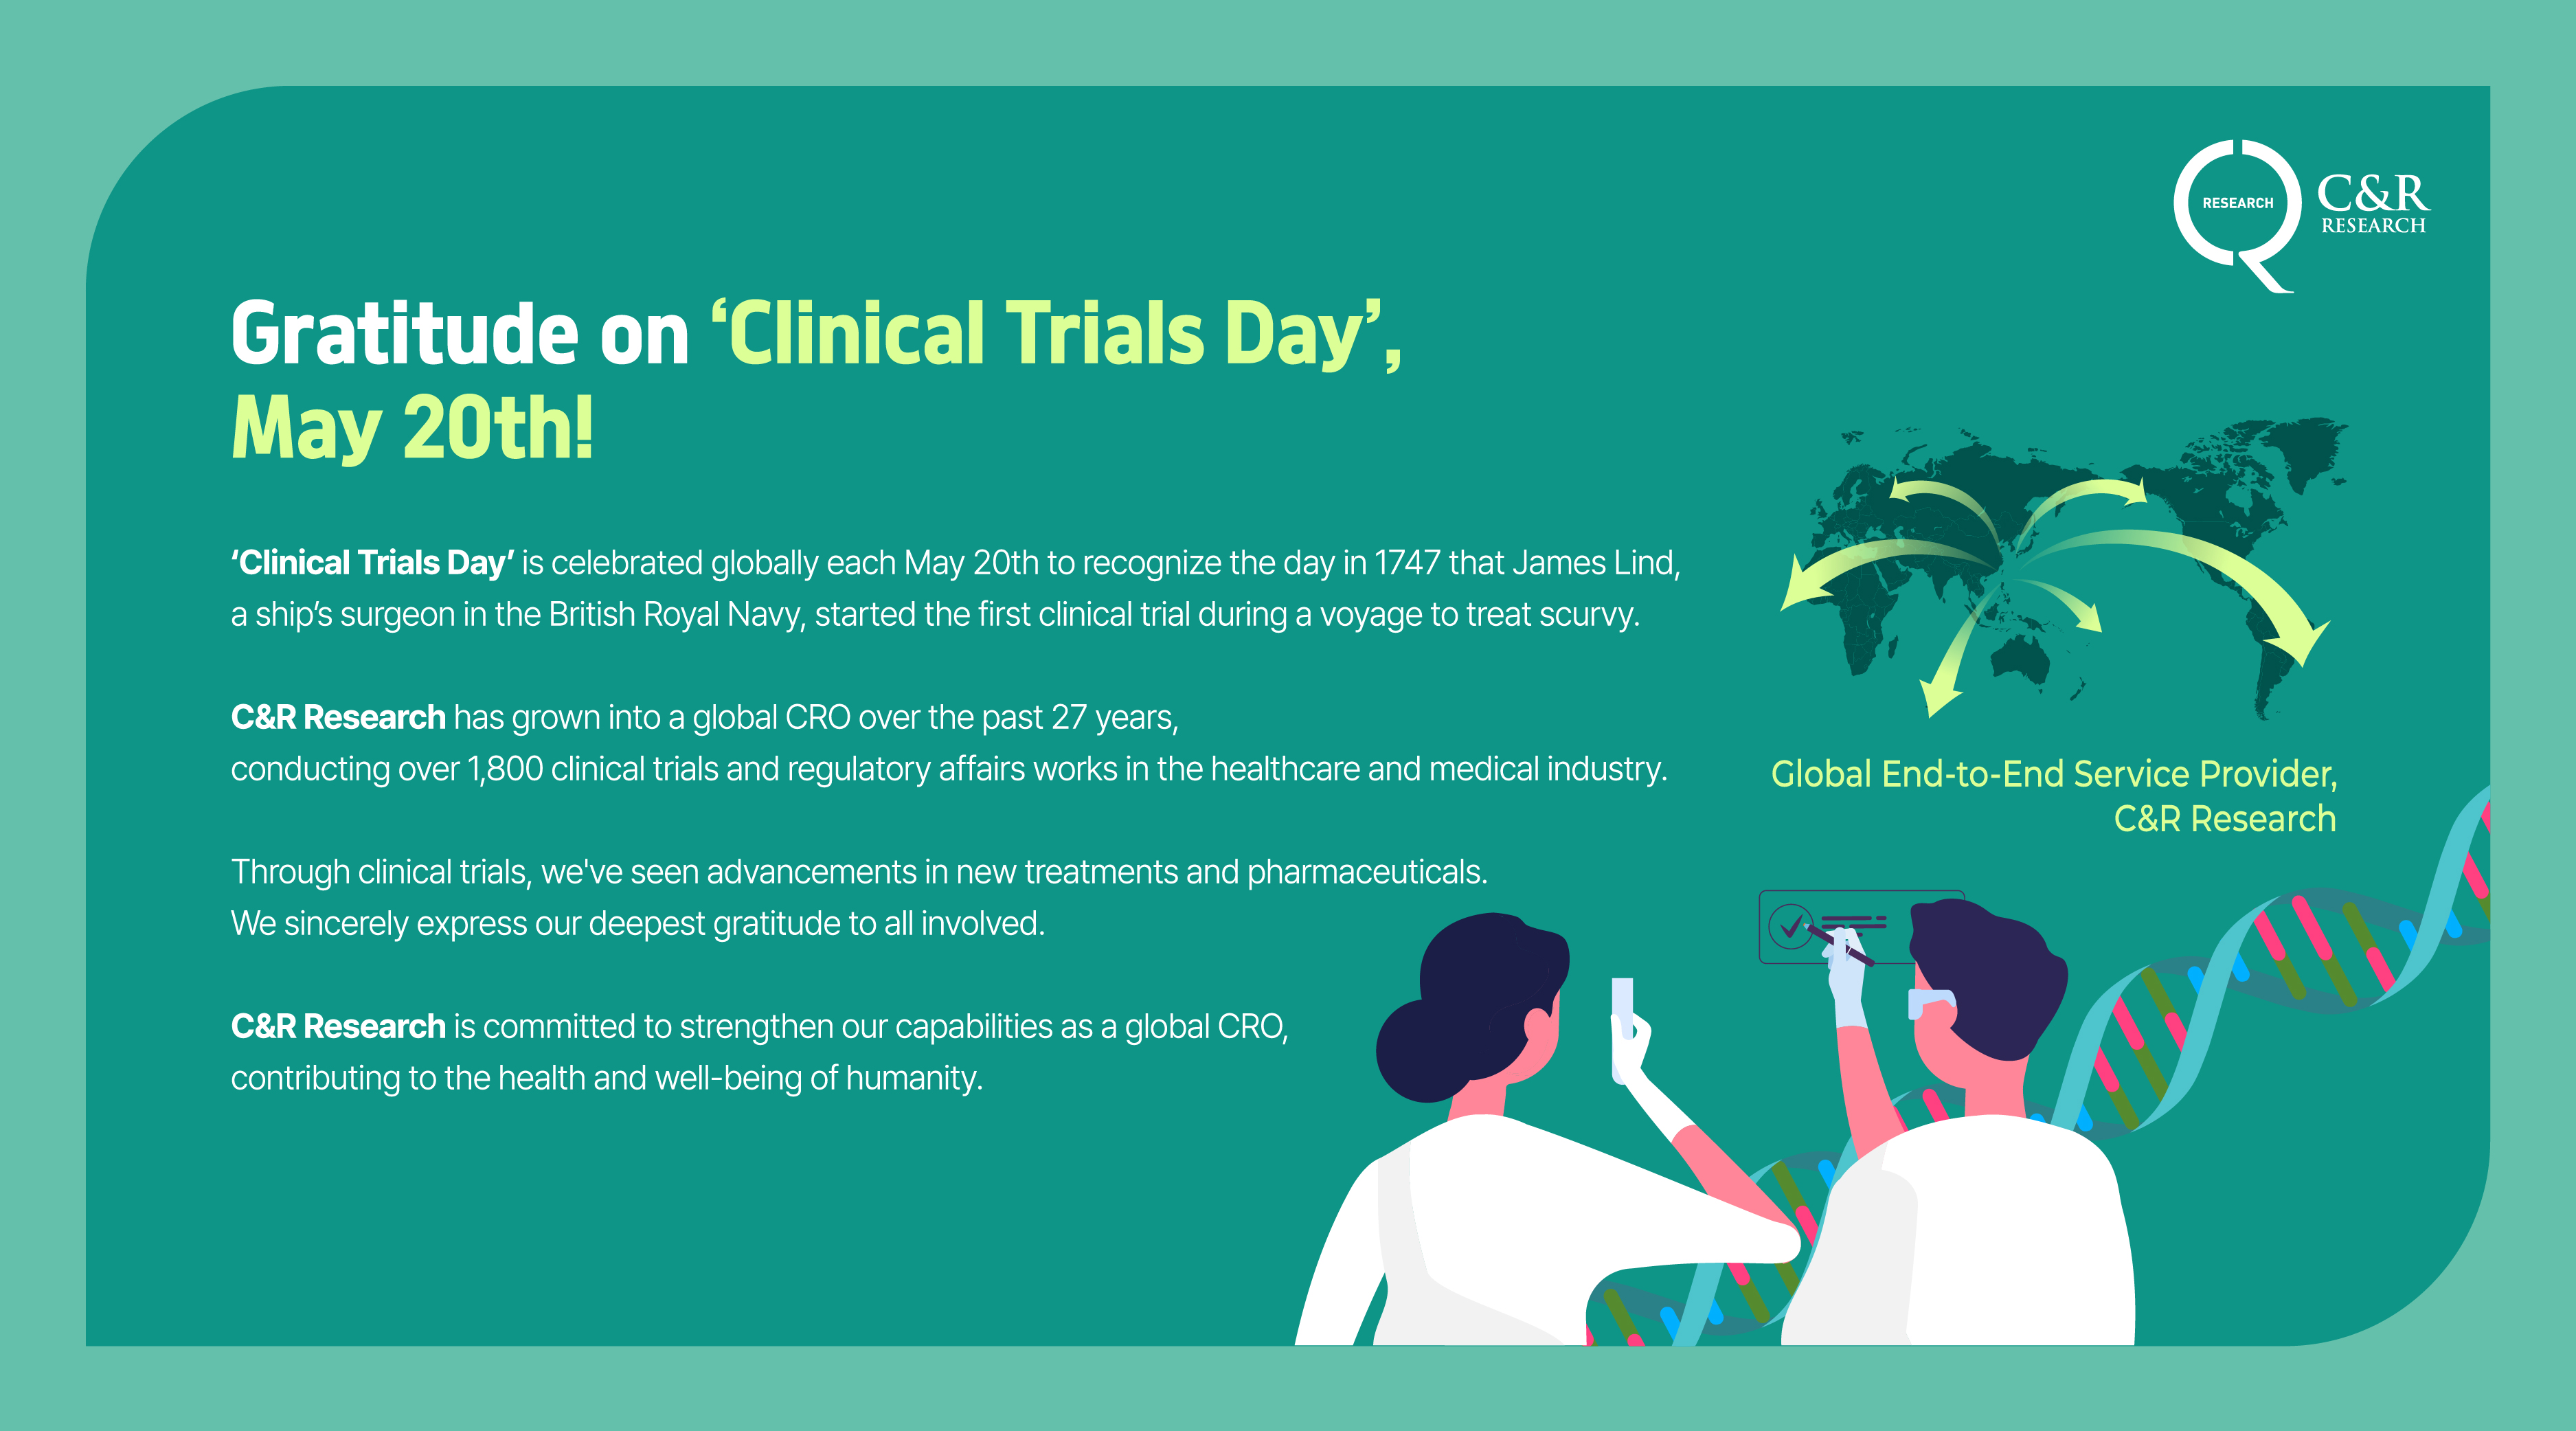 [C&R Research] Gratitude On ‘Clinical Trials Day’, May 20th!